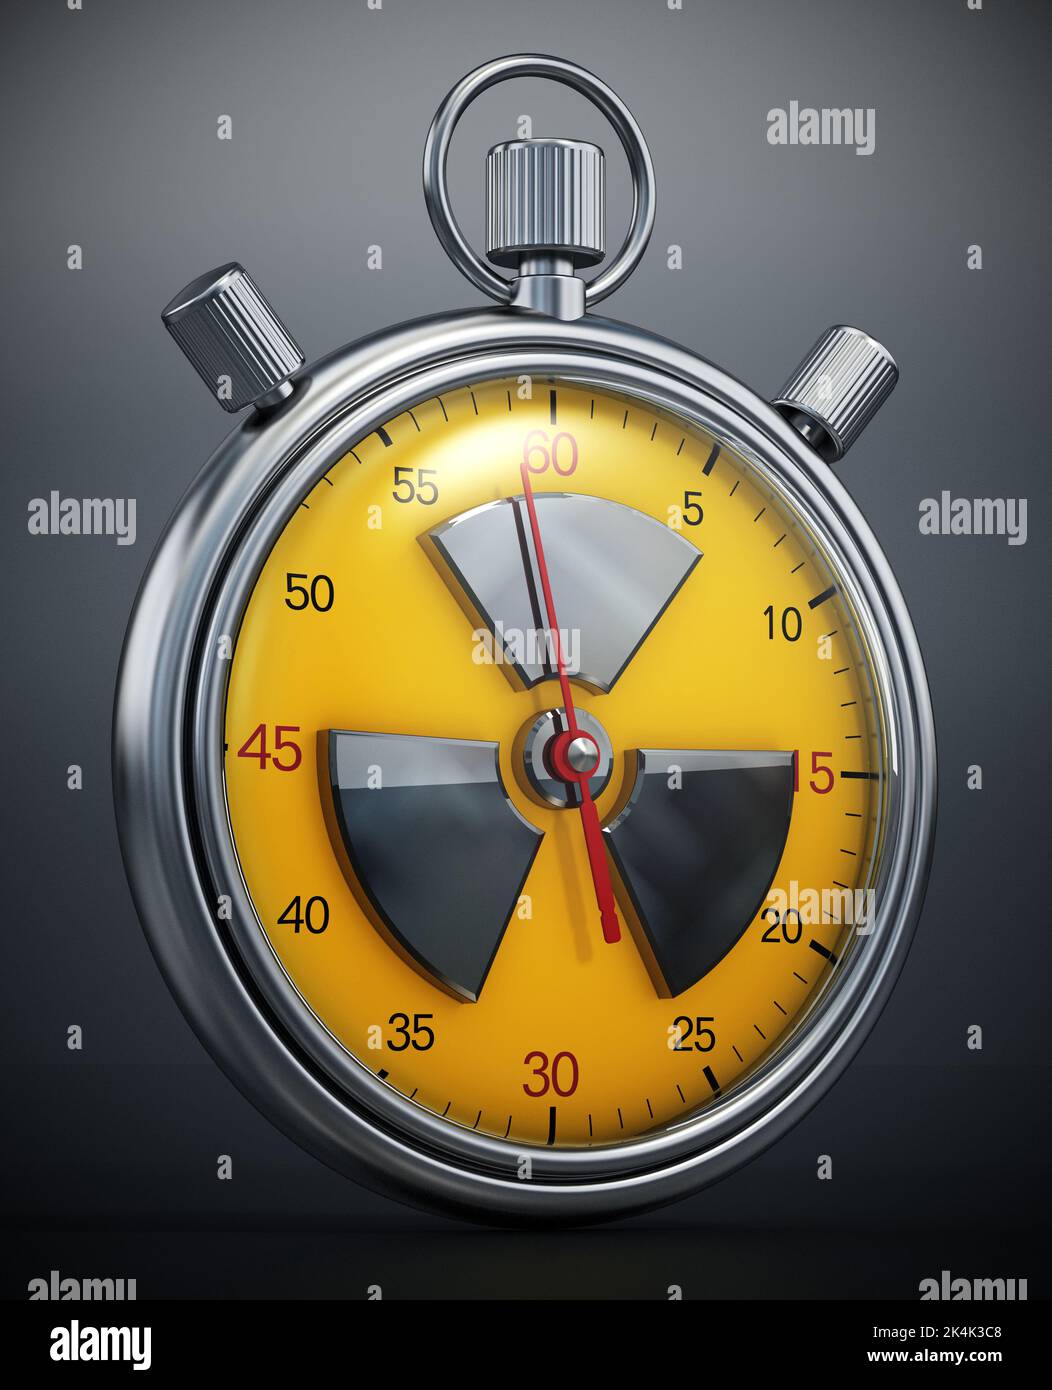 Chronometer with radiation icon. Nuclear war countdown concept. 3D illustration. Stock Photo